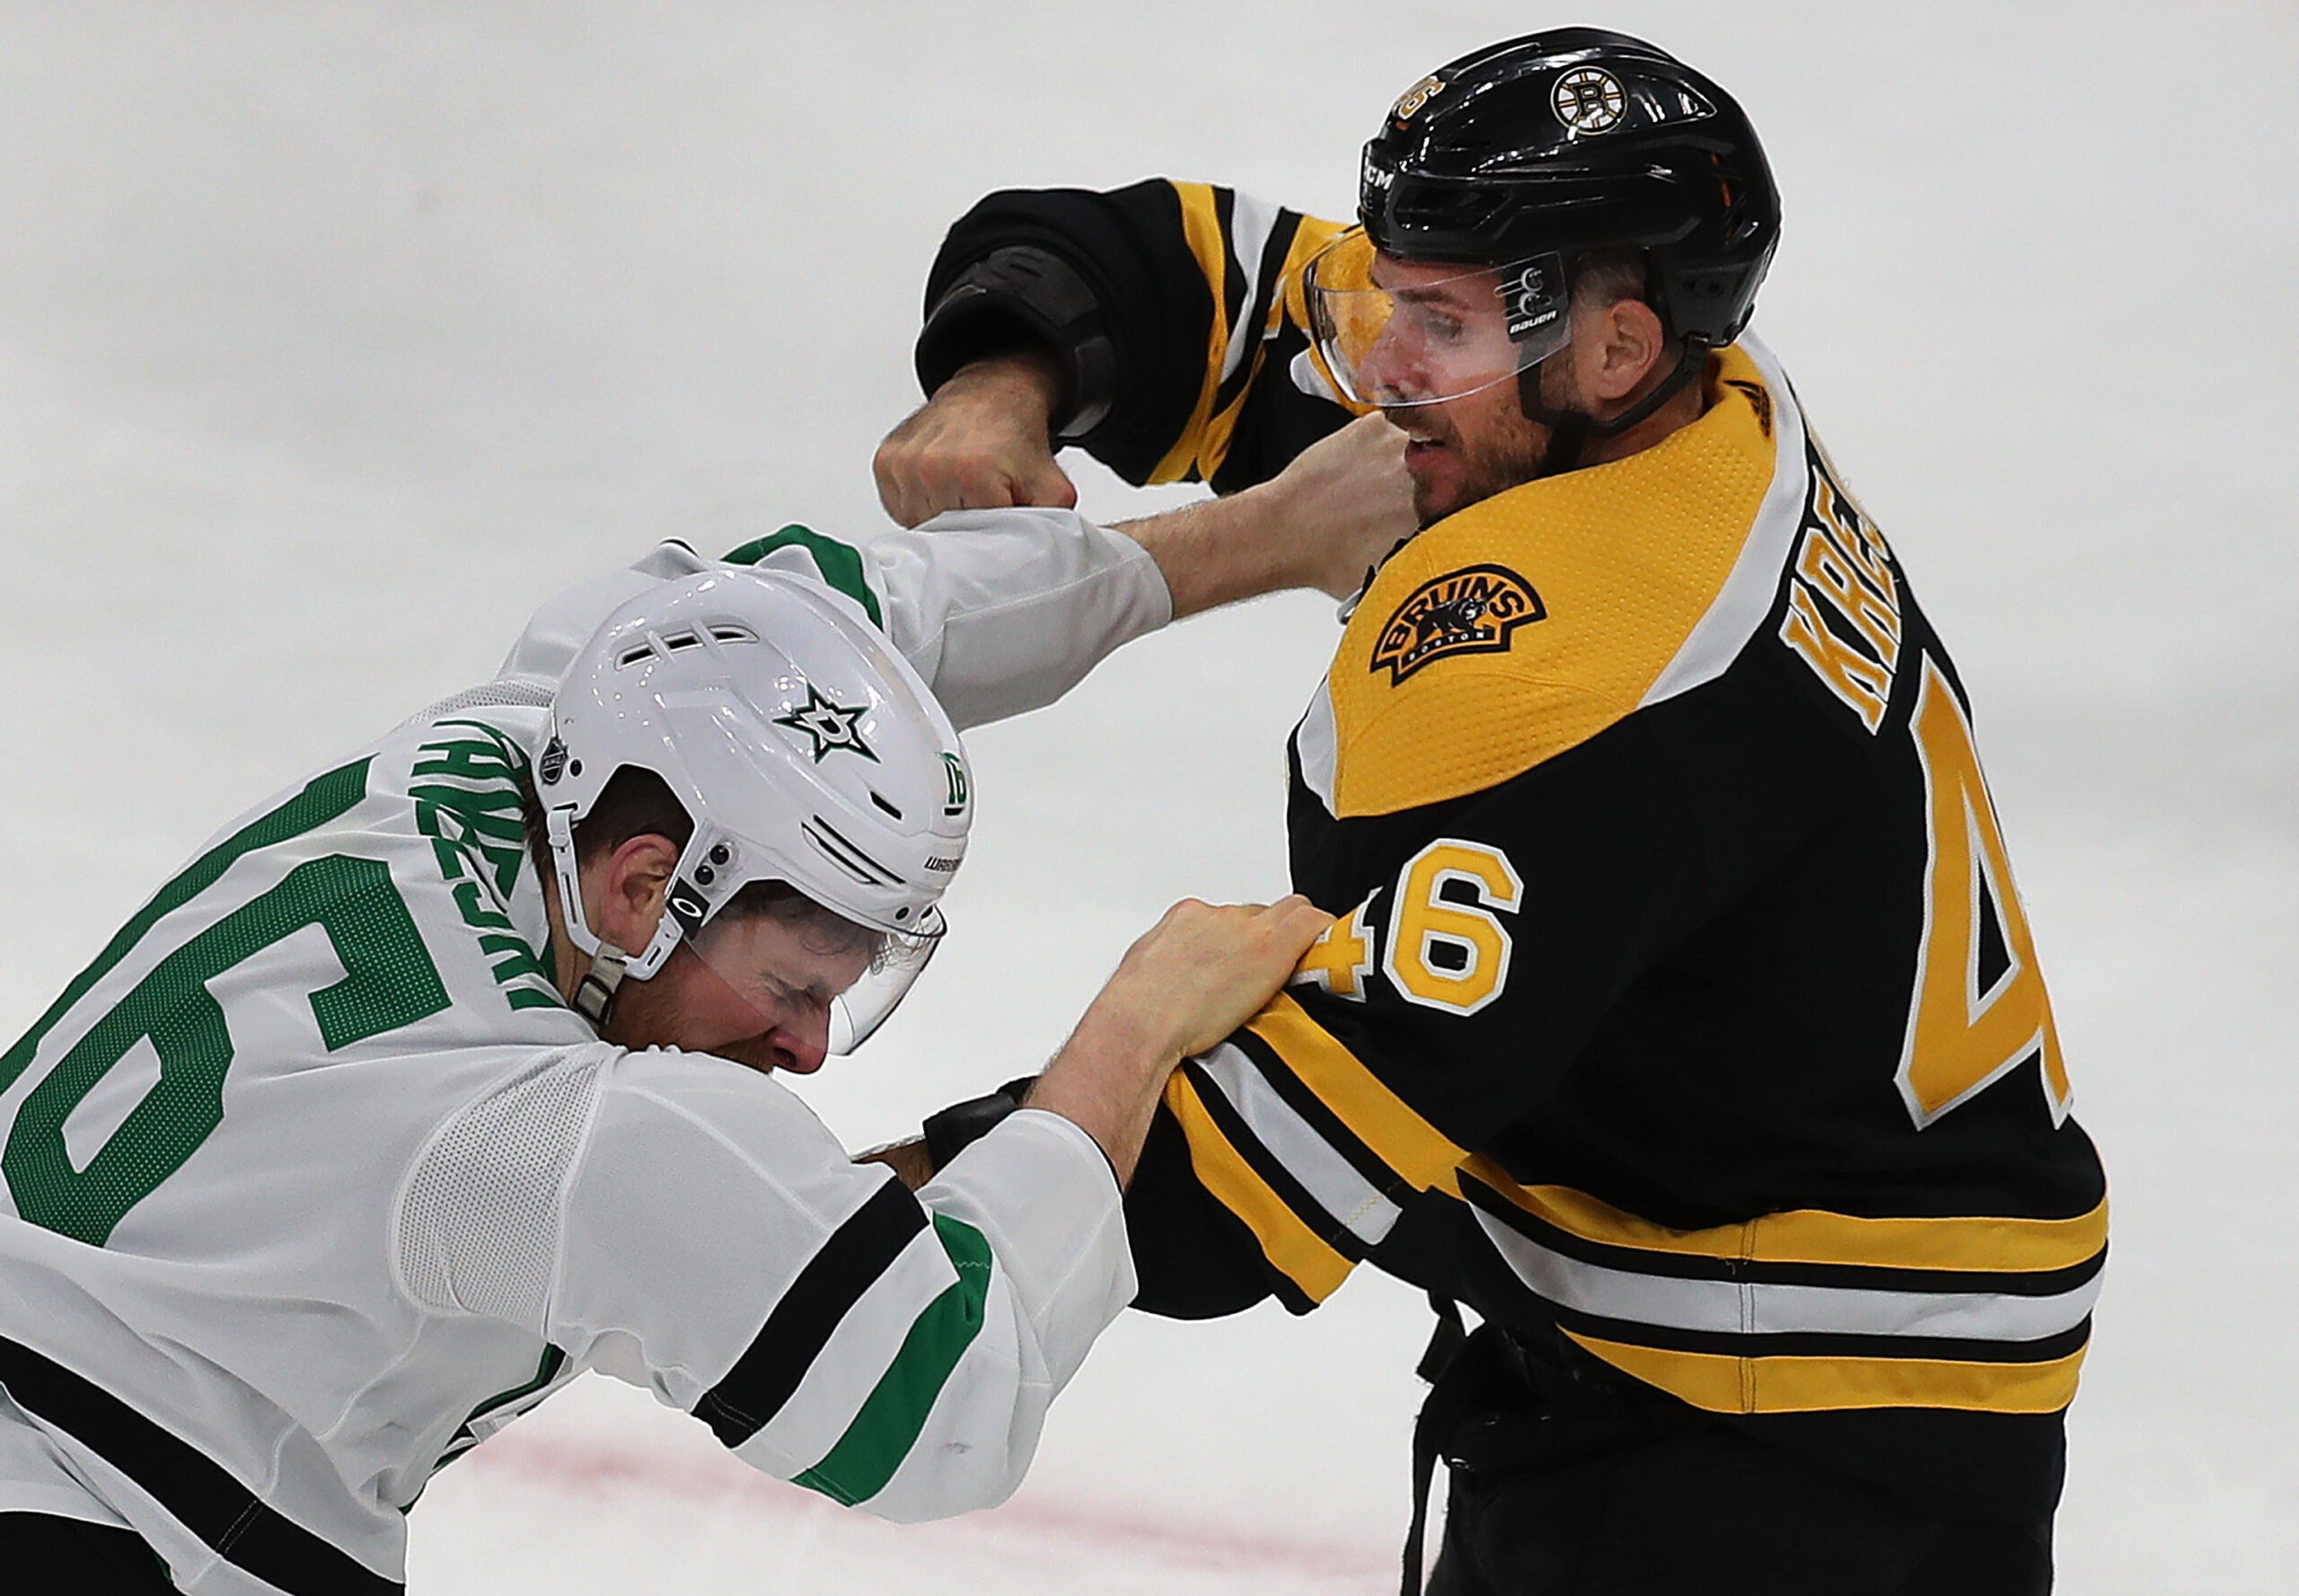 Boston Bruins: What if Tyler Seguin was never traded? - Page 3